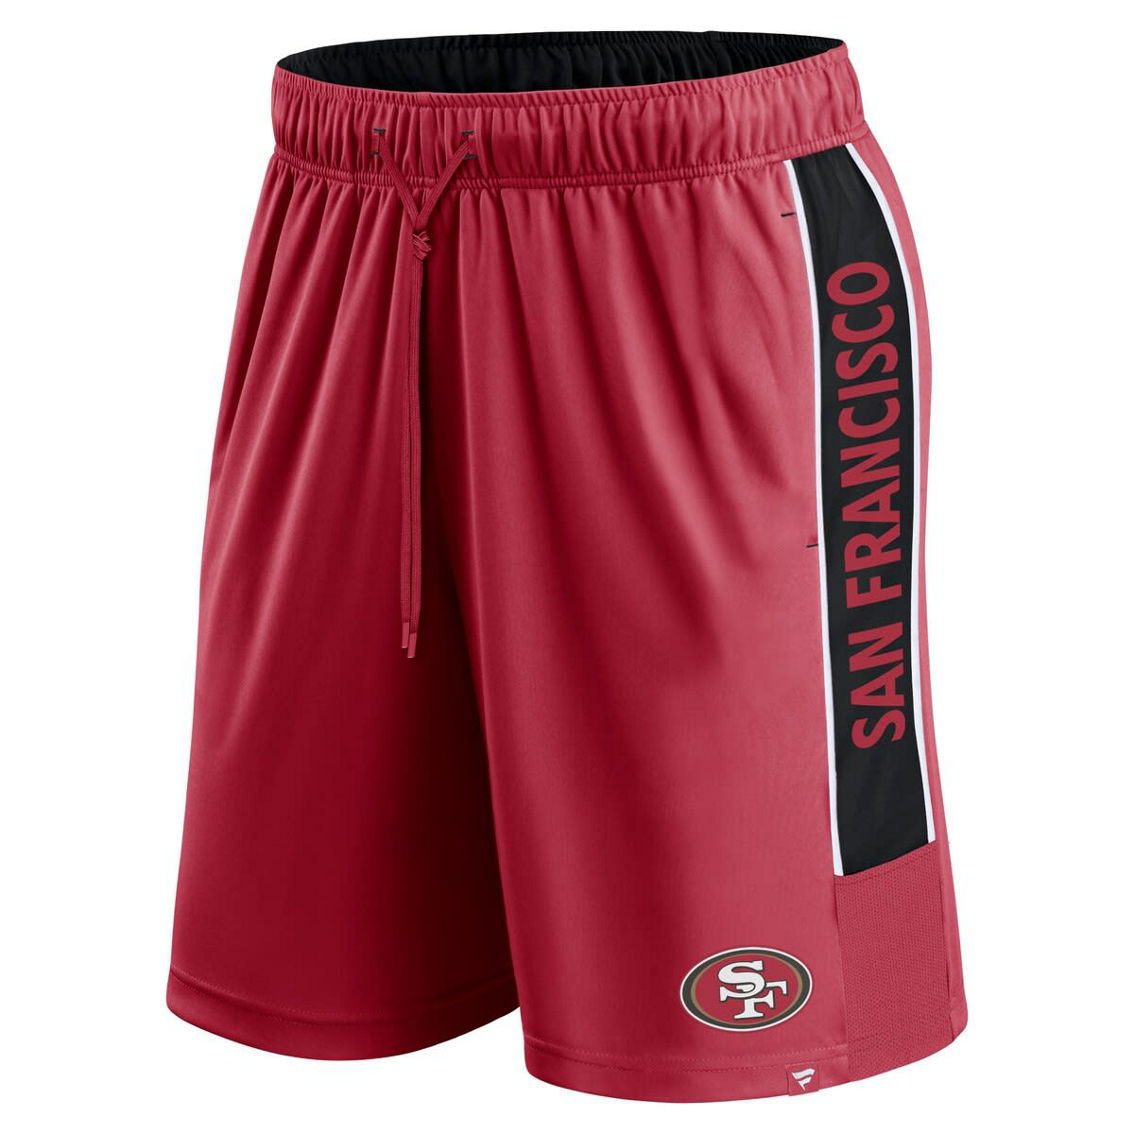 Fanatics Branded Men's Scarlet San Francisco 49ers Win The Match Shorts - Image 3 of 4